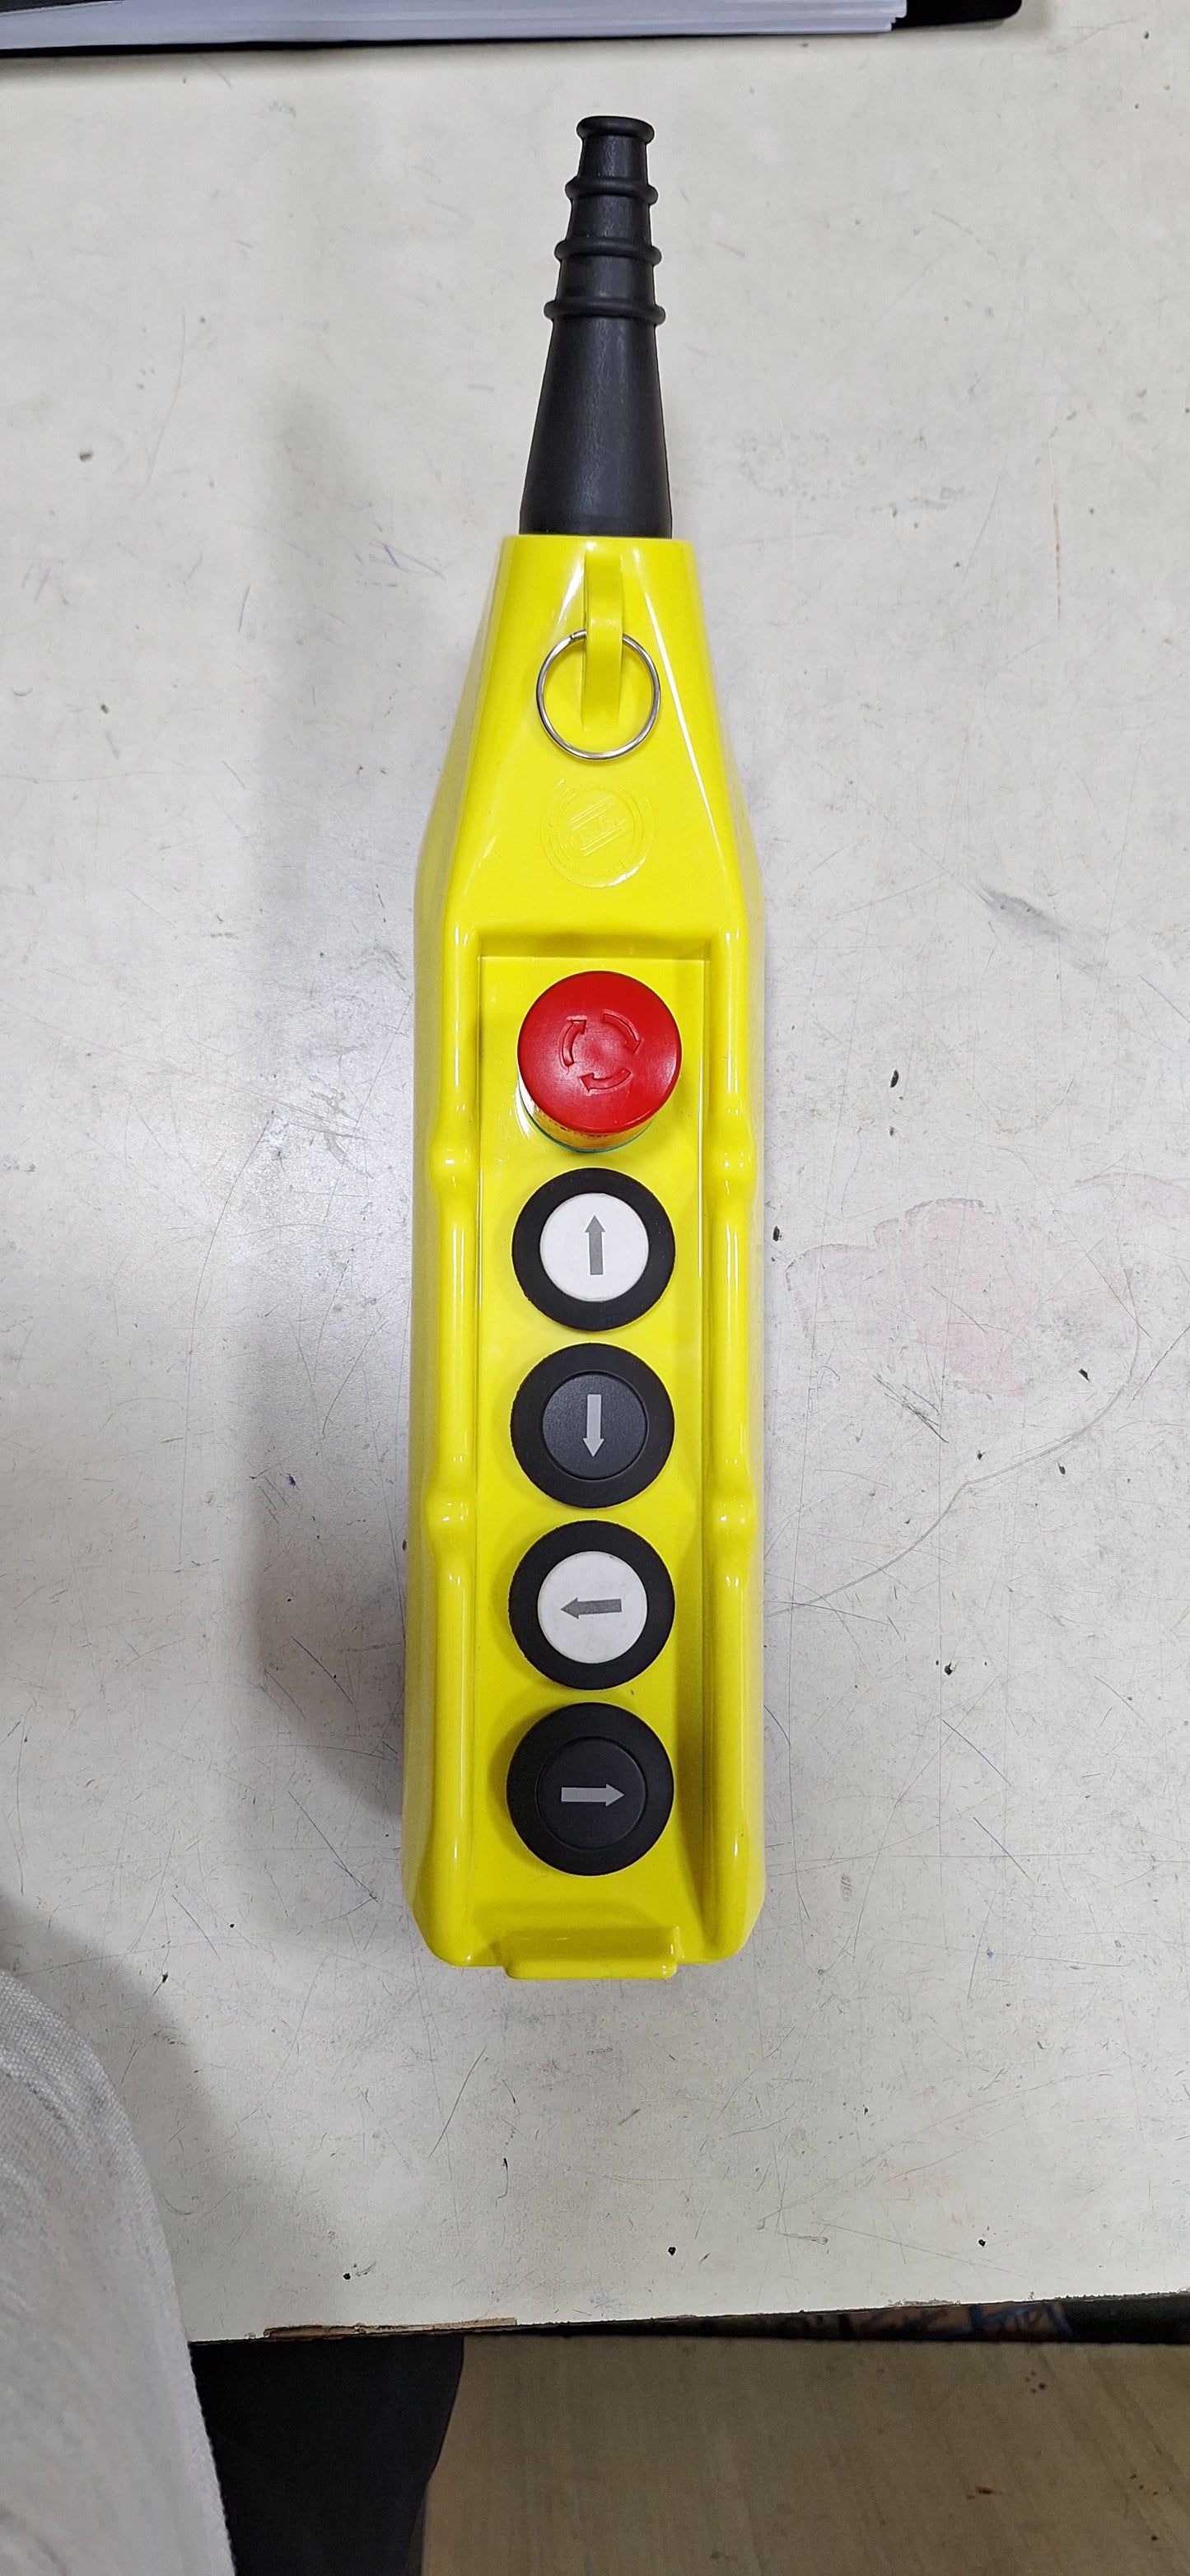 Four way push button station fot crane with emergeny stop